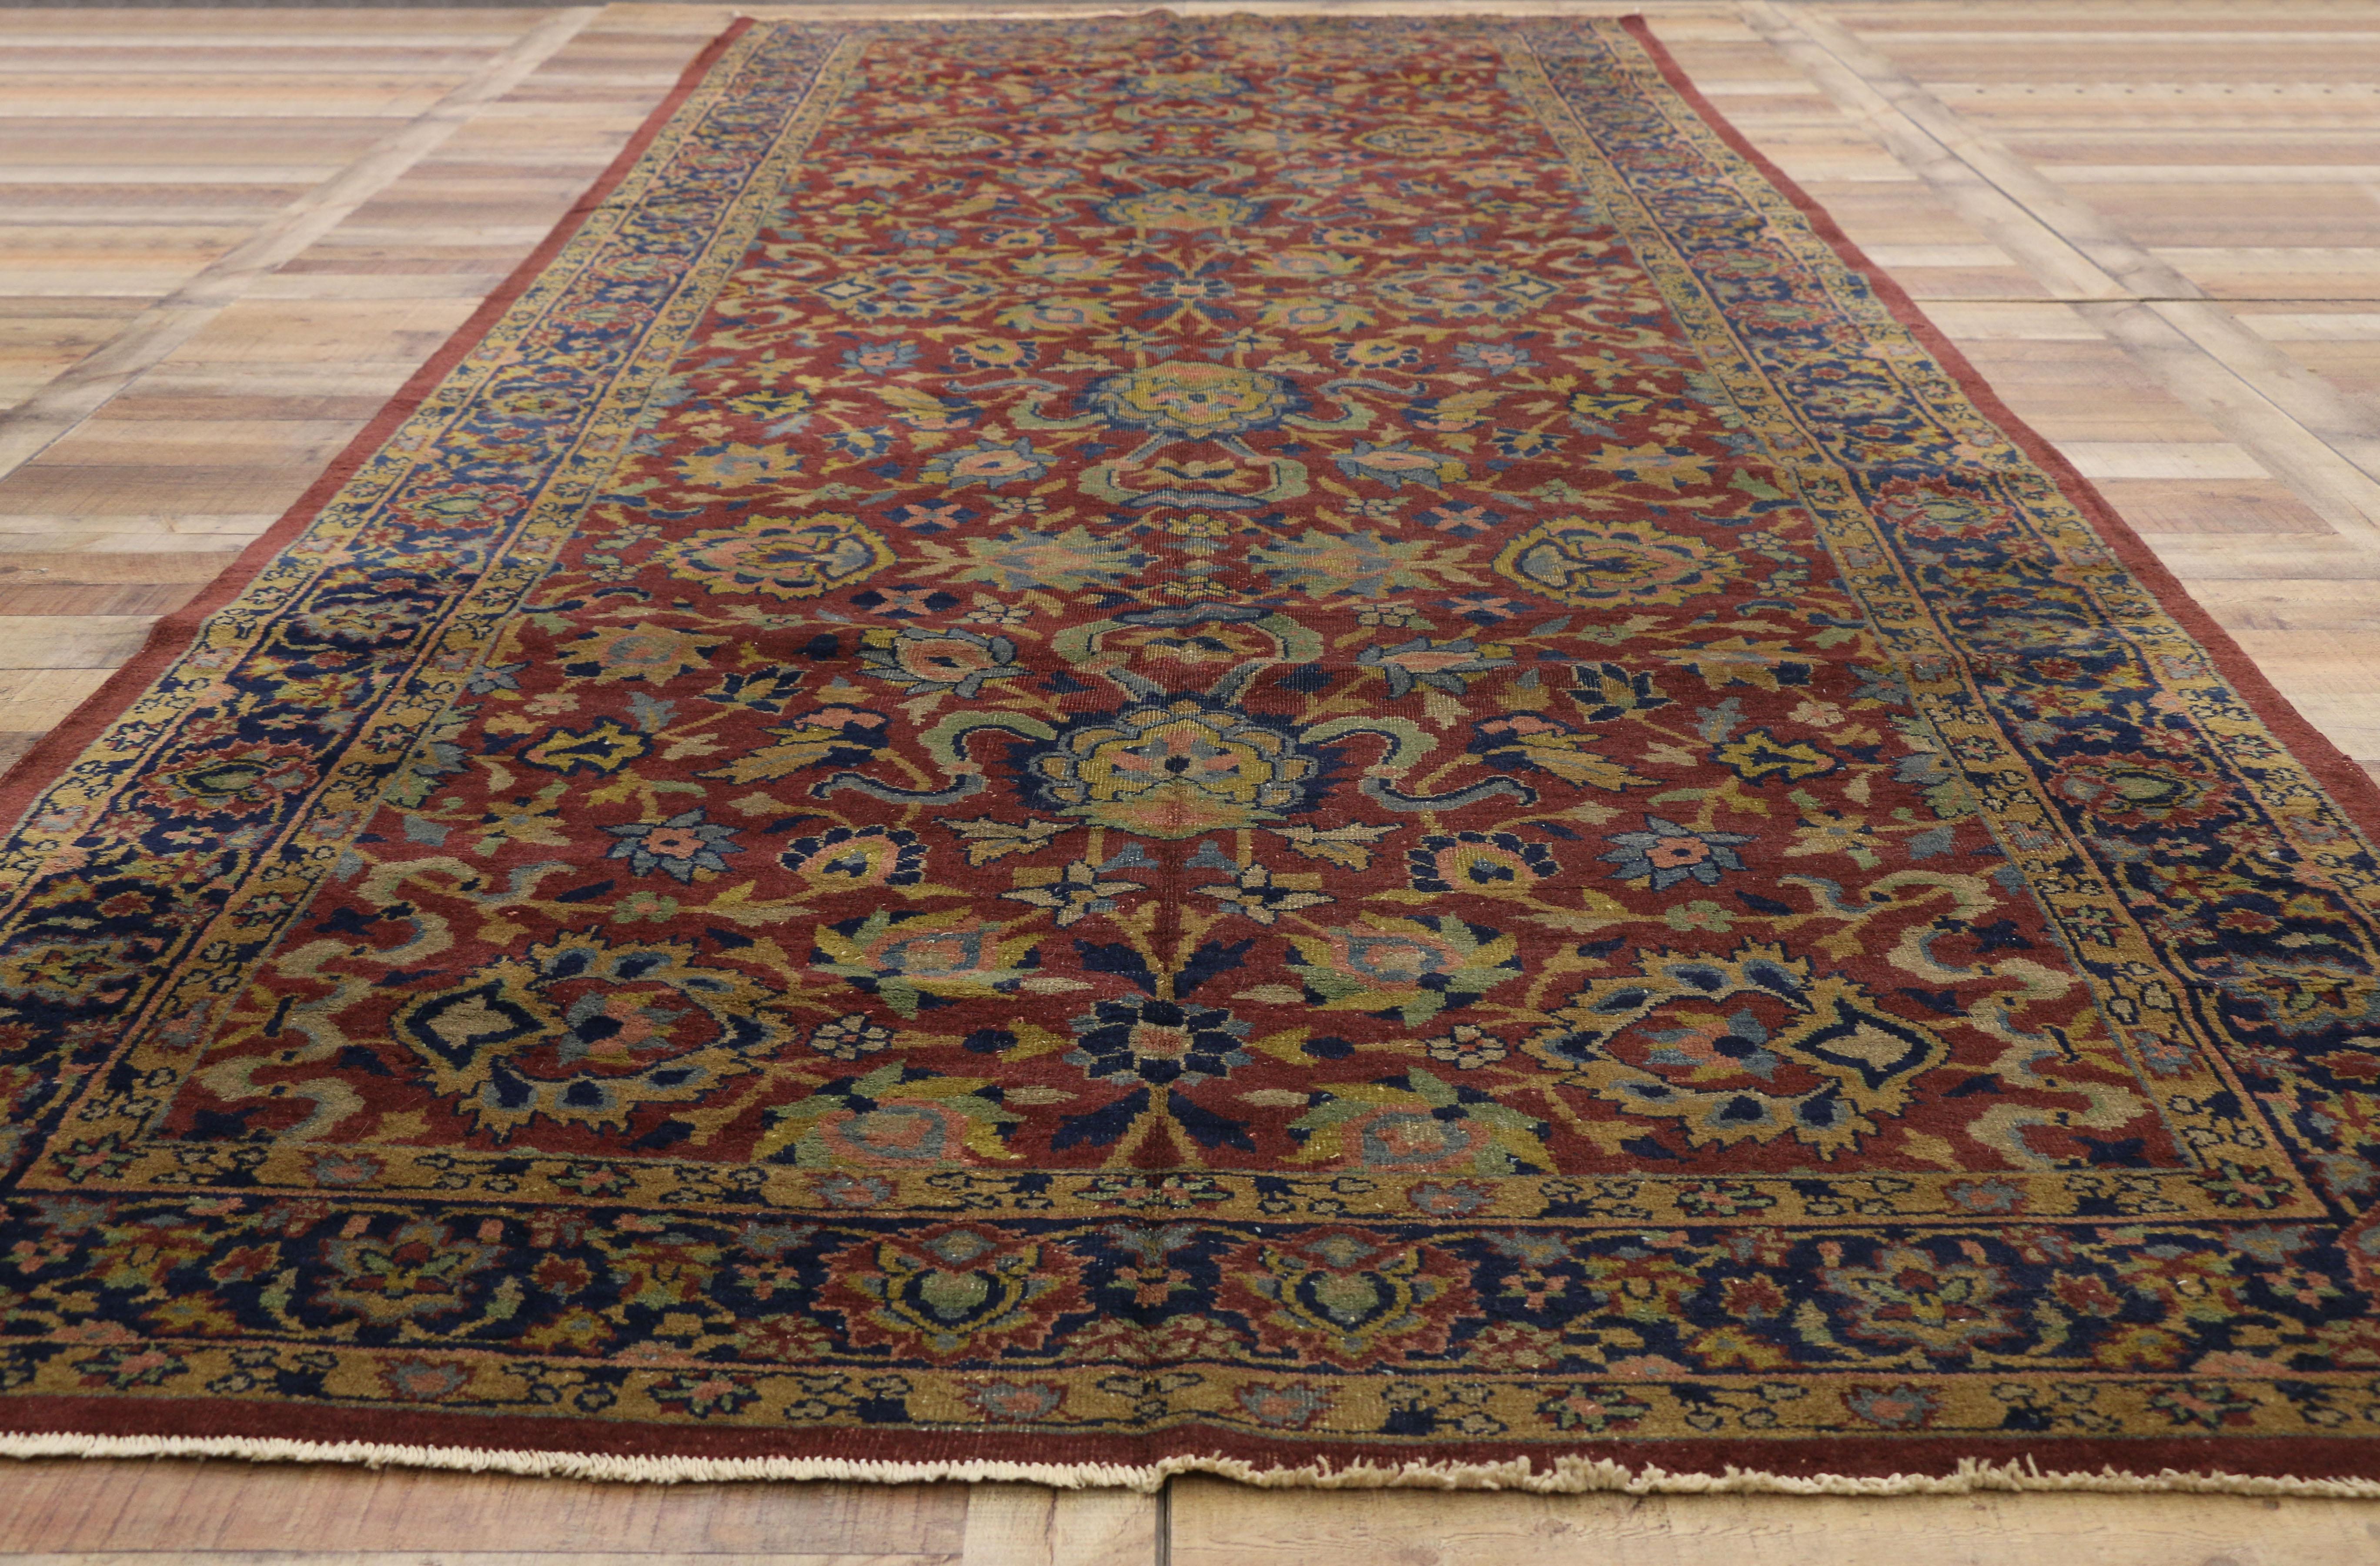 Antique Indian Agra William Morris Inspired Gallery Rug with Arts & Crafts Style In Good Condition For Sale In Dallas, TX